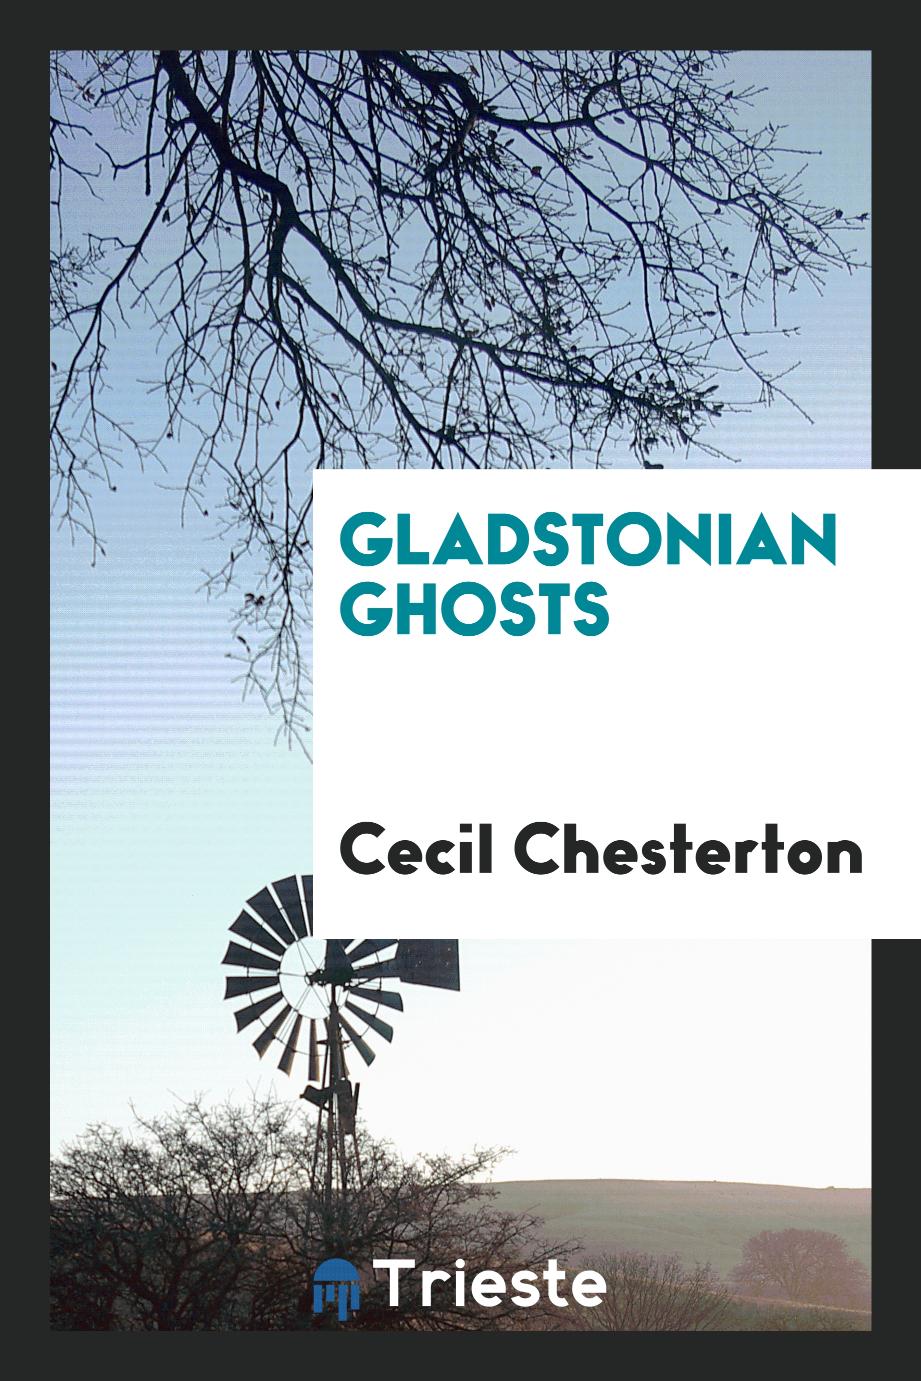 Gladstonian ghosts